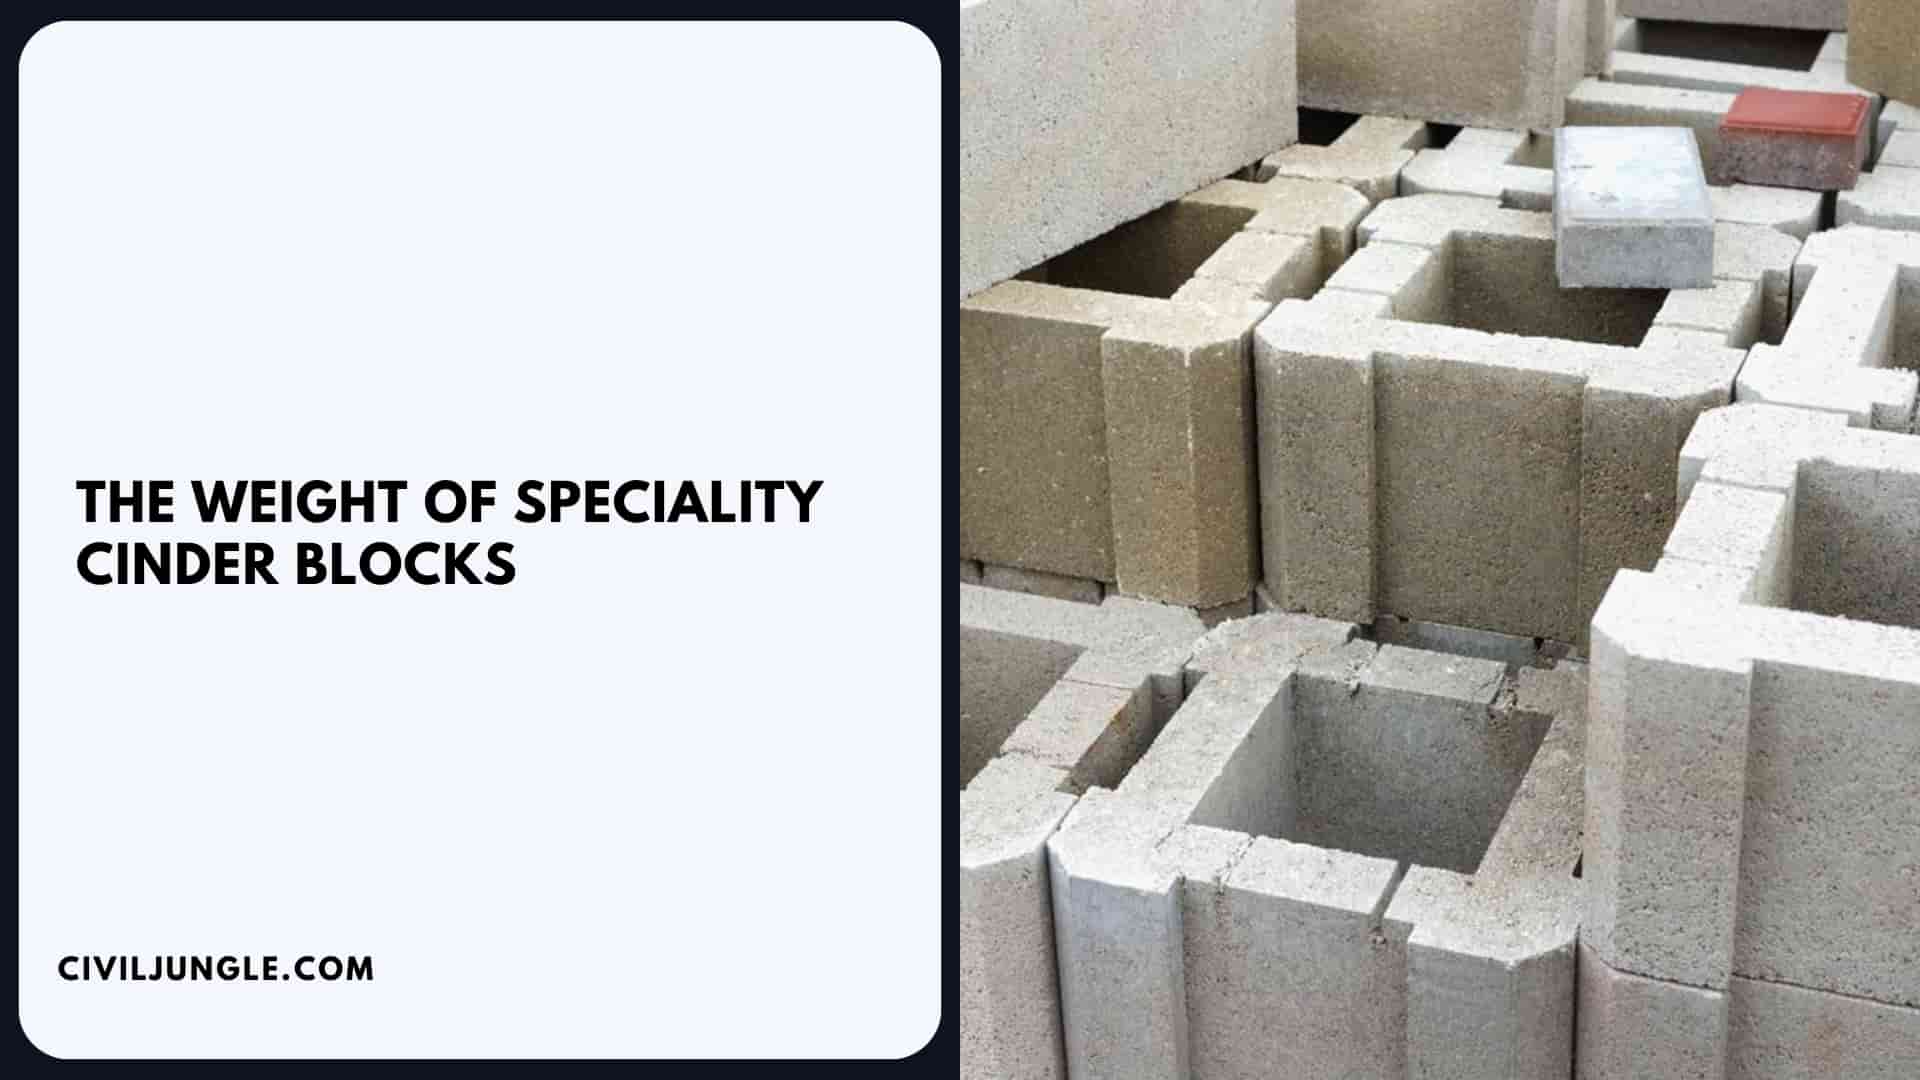 The Weight of Speciality Cinder Blocks